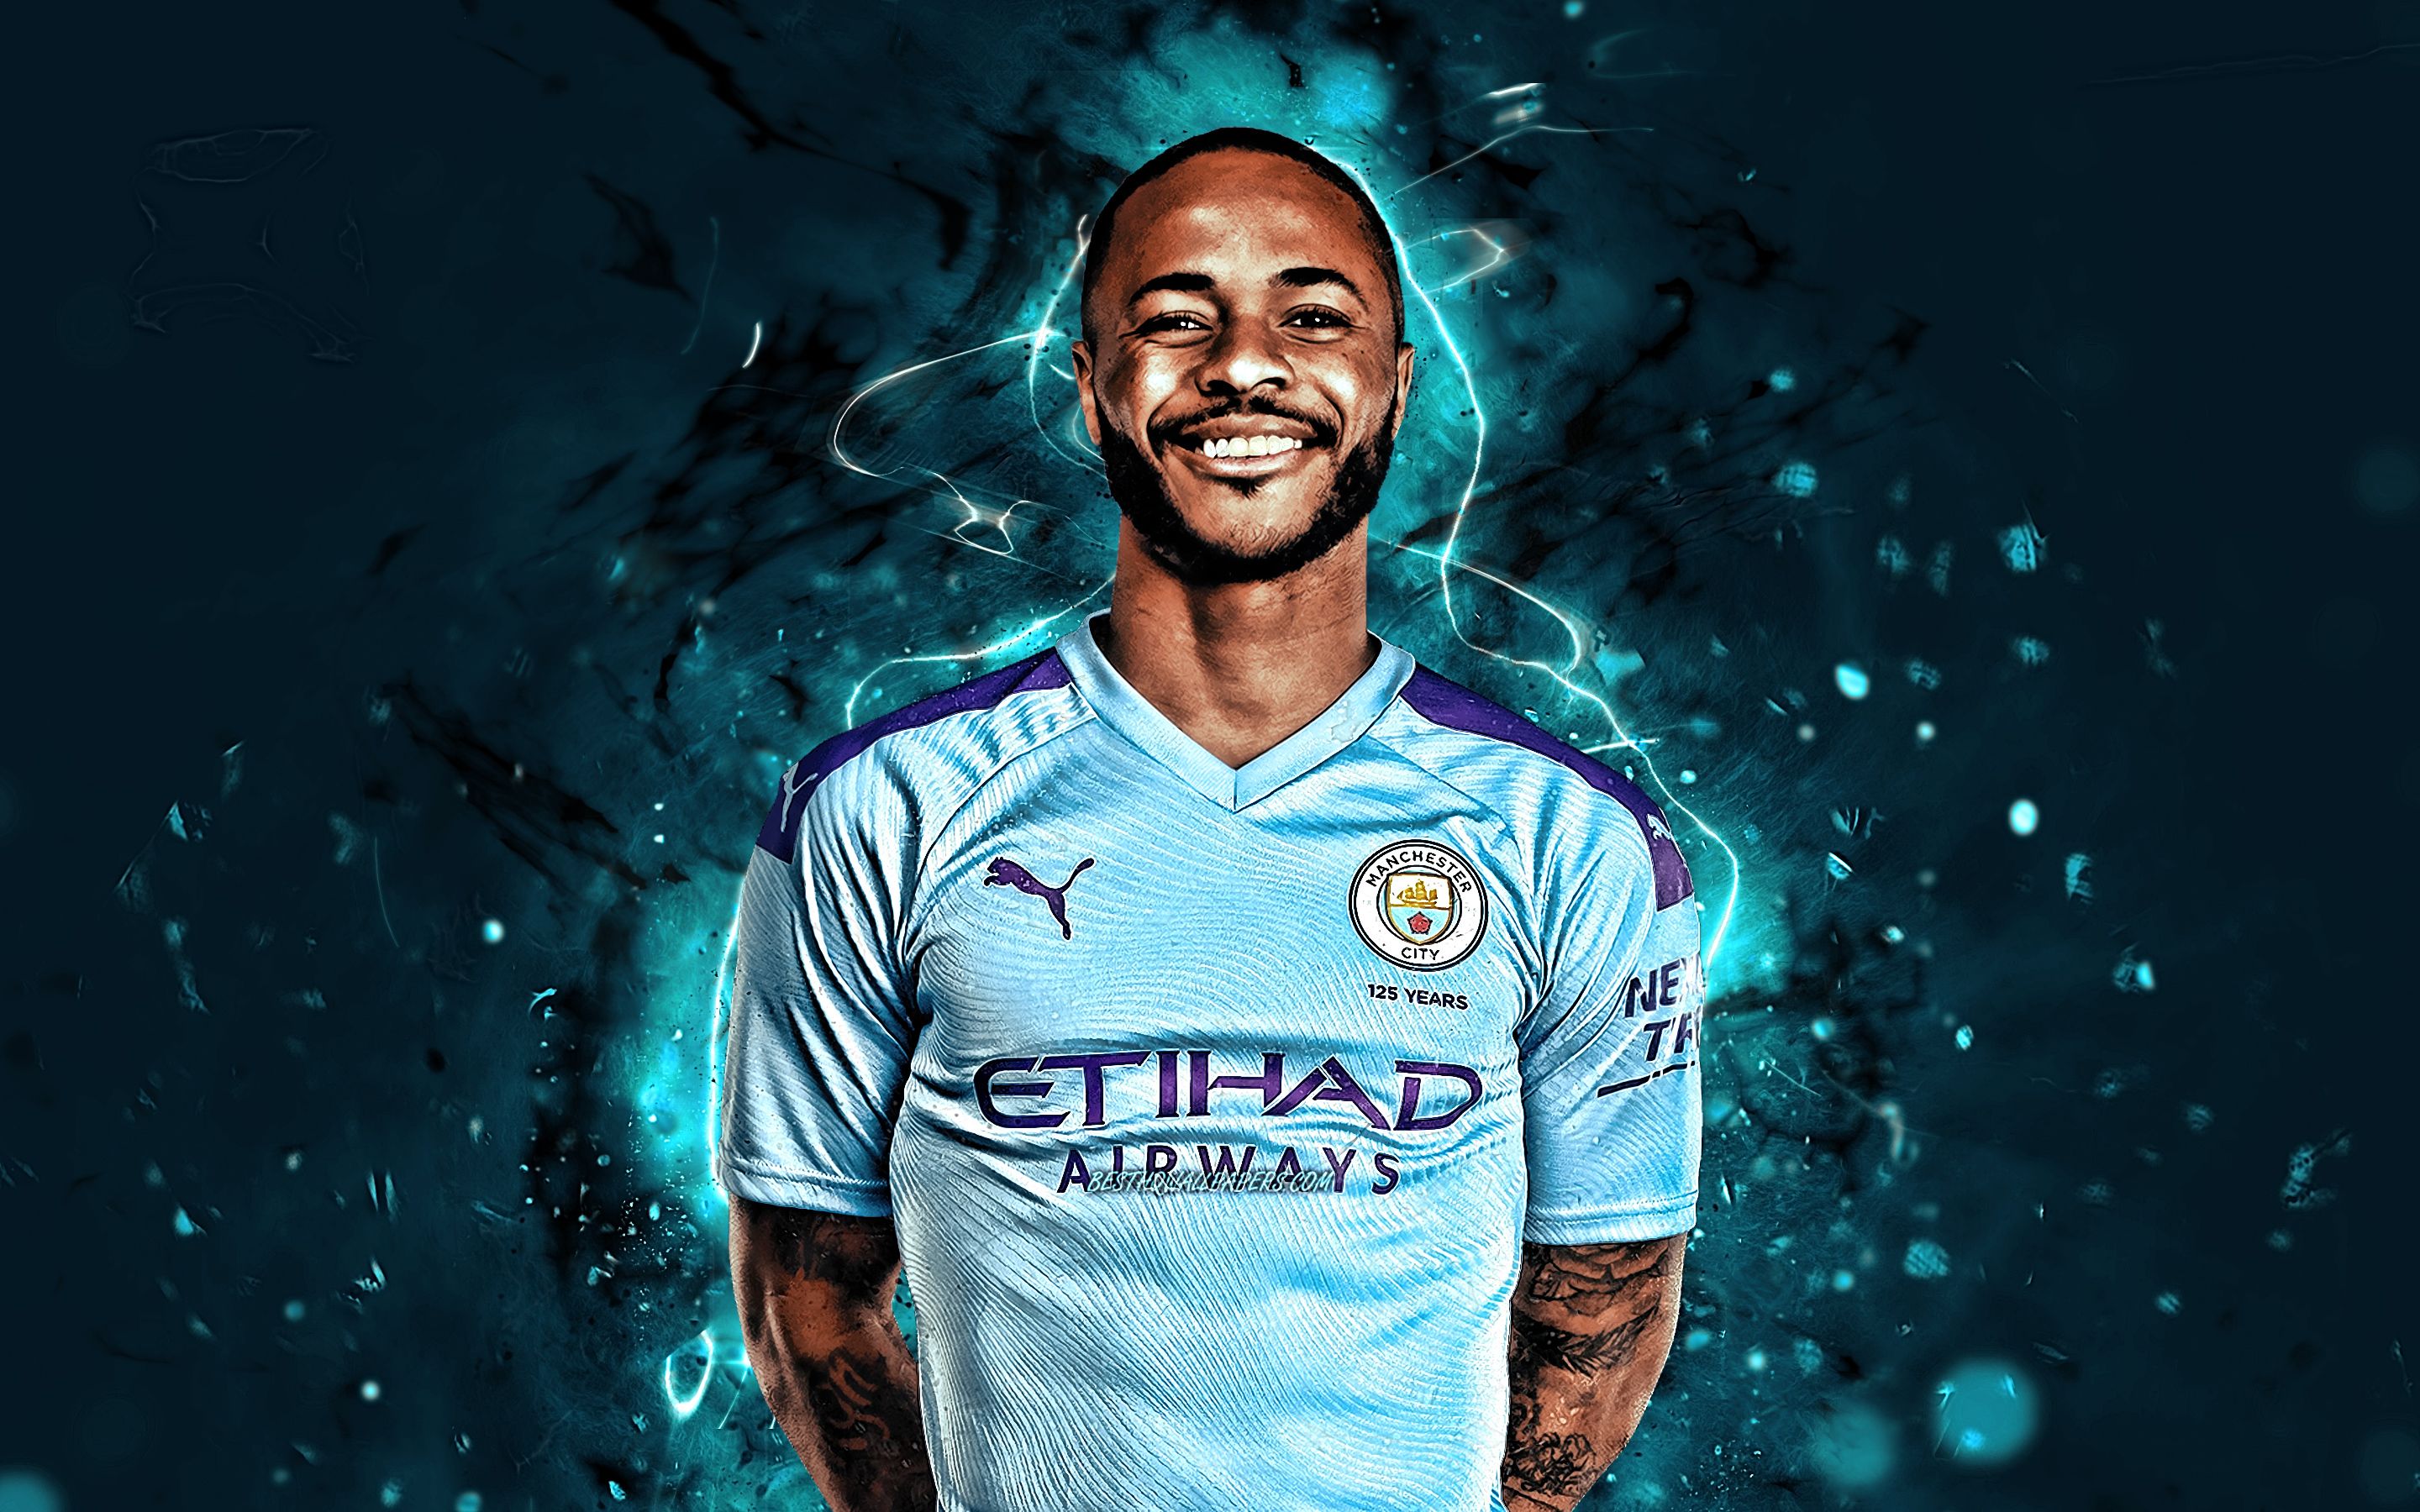 Download wallpaper Raheem Sterling, season 2019- english footballers, forward, Manchester City FC, neon lights, Raheem Shaquille Sterling, soccer, Premier League, football, Man City for desktop with resolution 2880x1800. High Quality HD picture